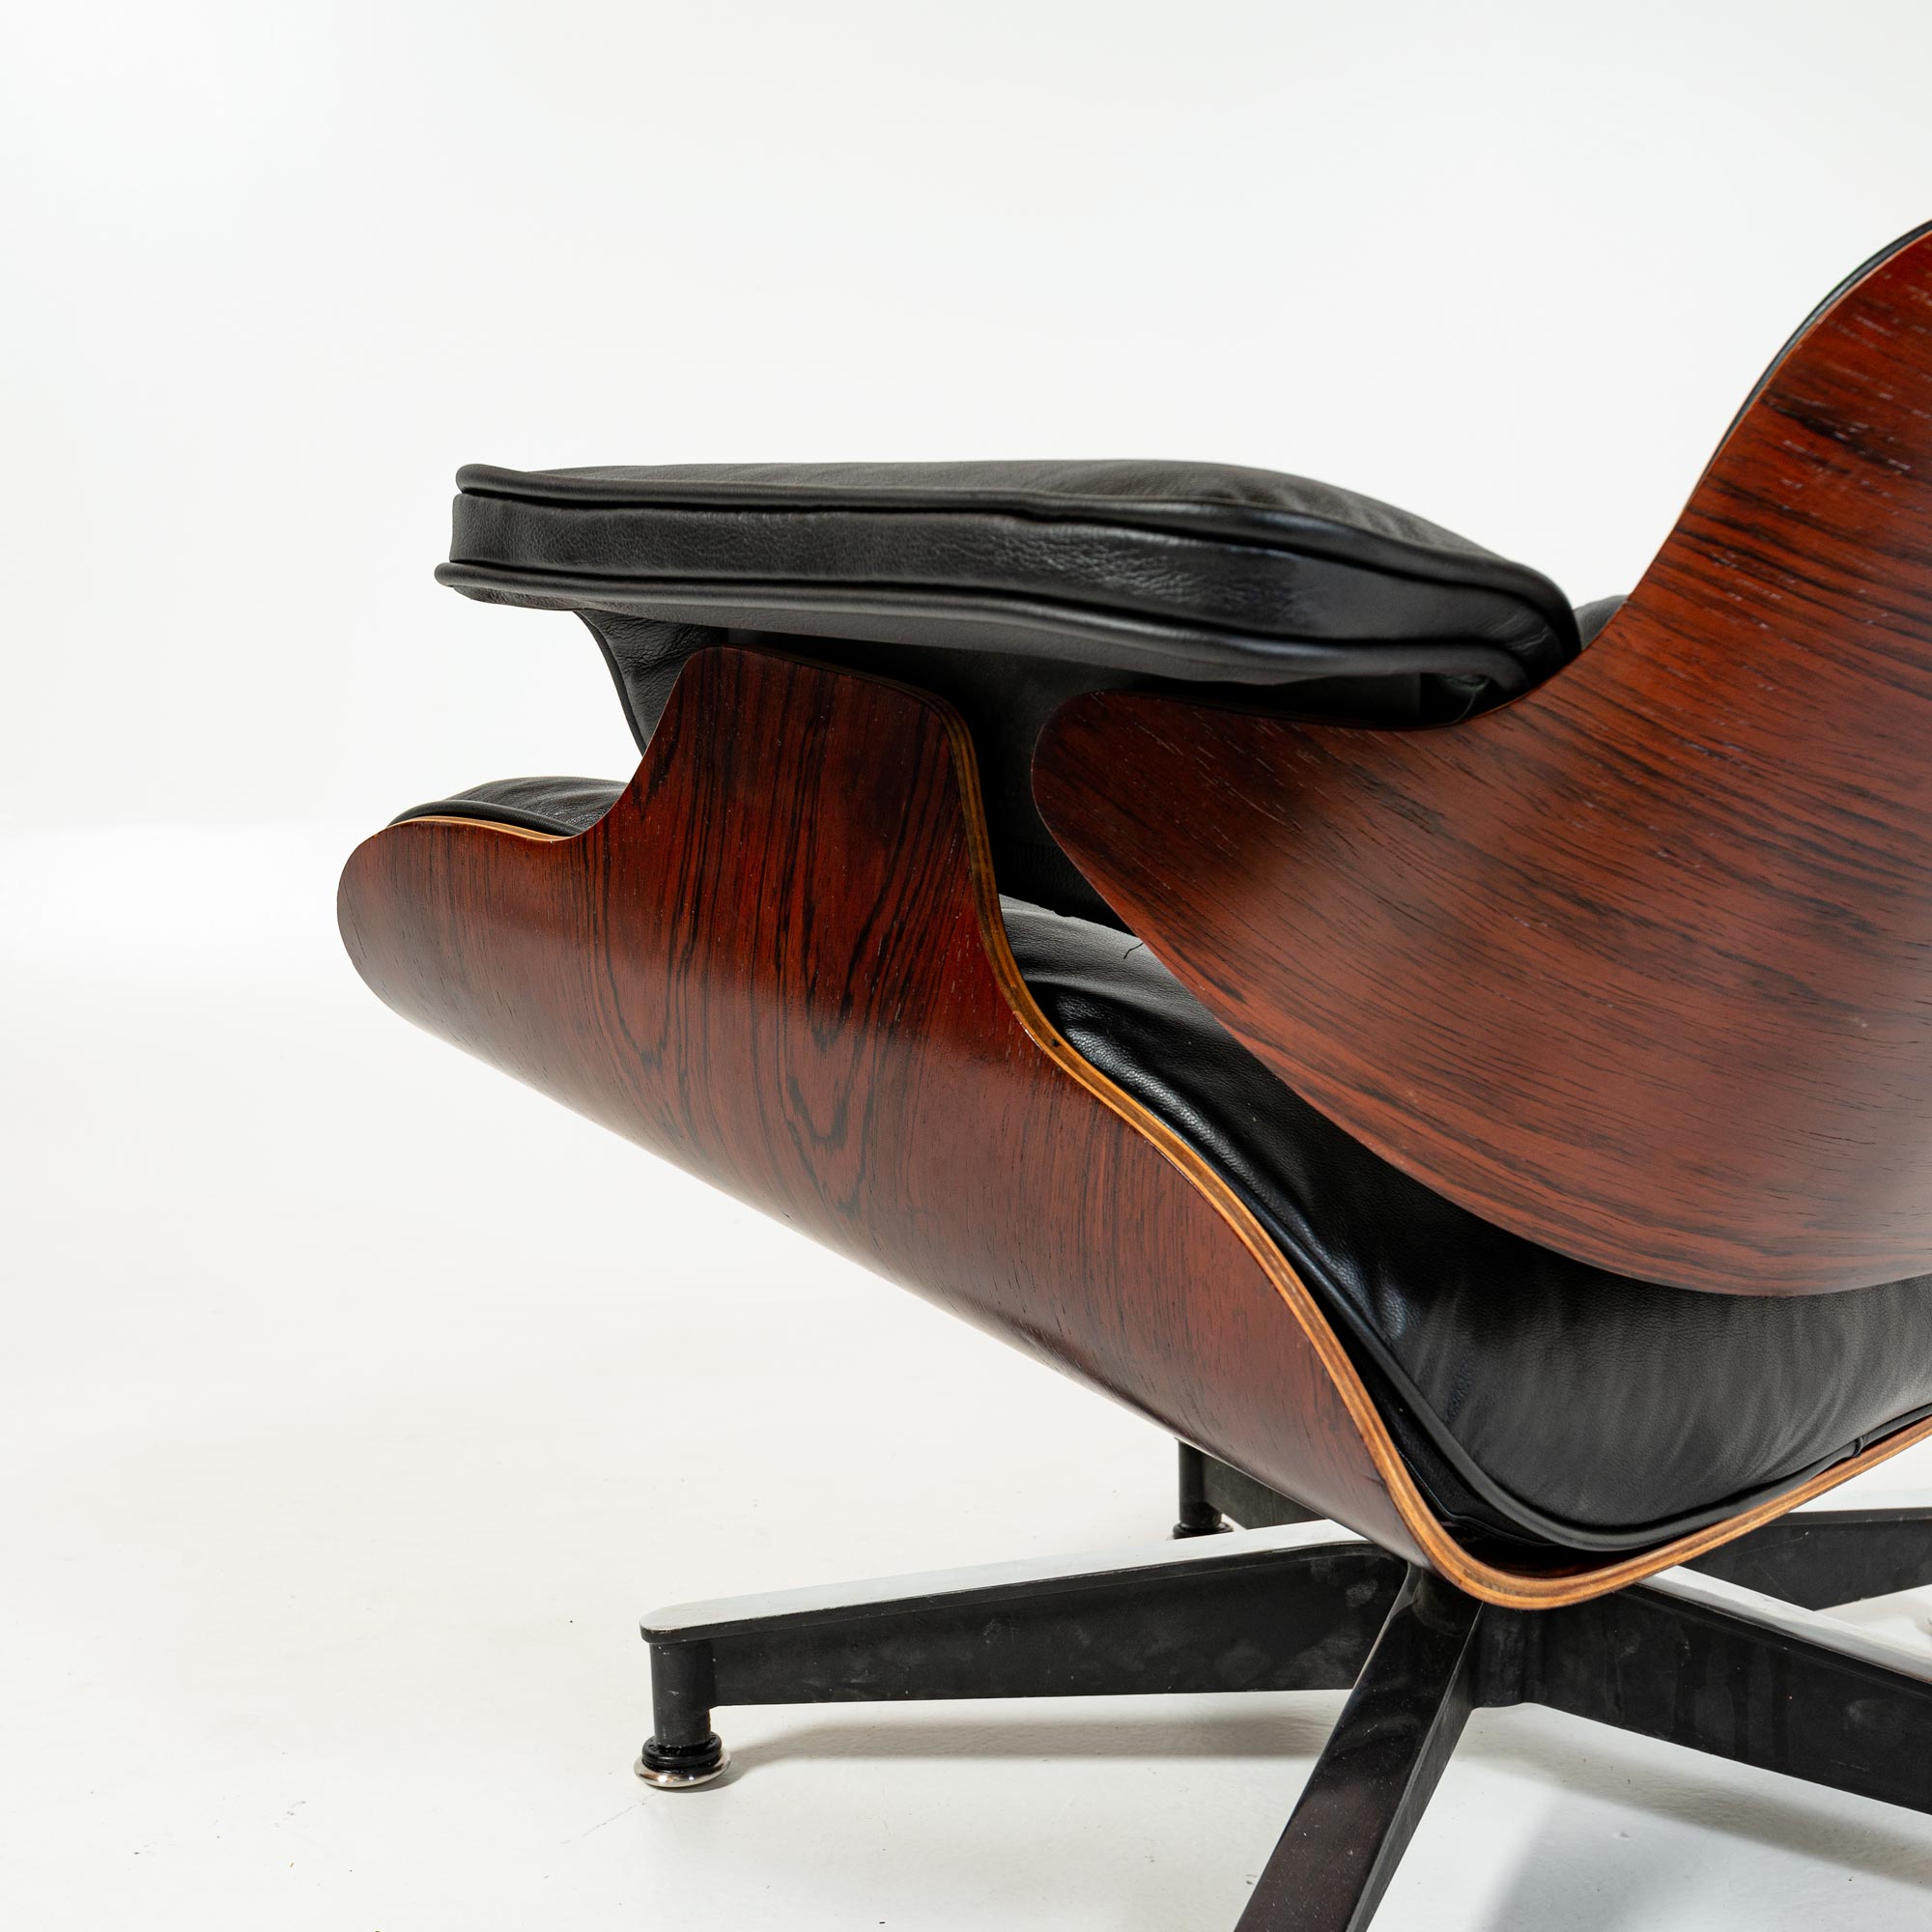 Very First Generation 1956 Eames Lounge Chair 670 and Spinning Ottoman 671